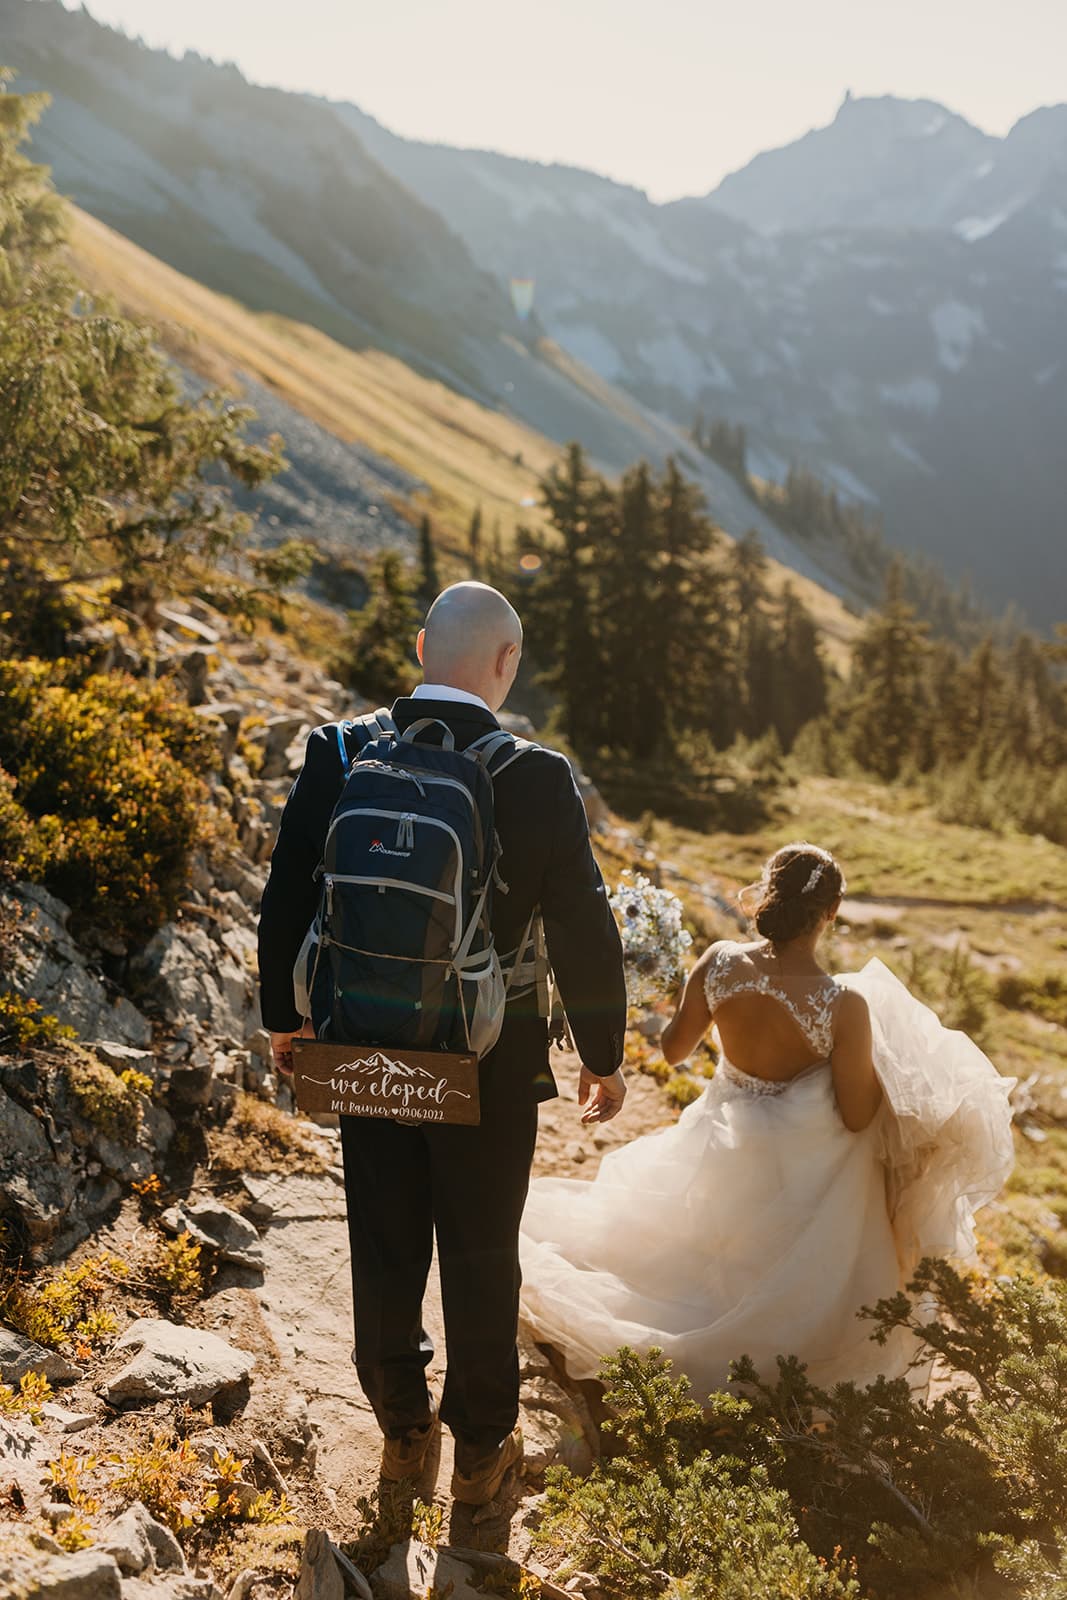 A couple just married hike down the mountain together.